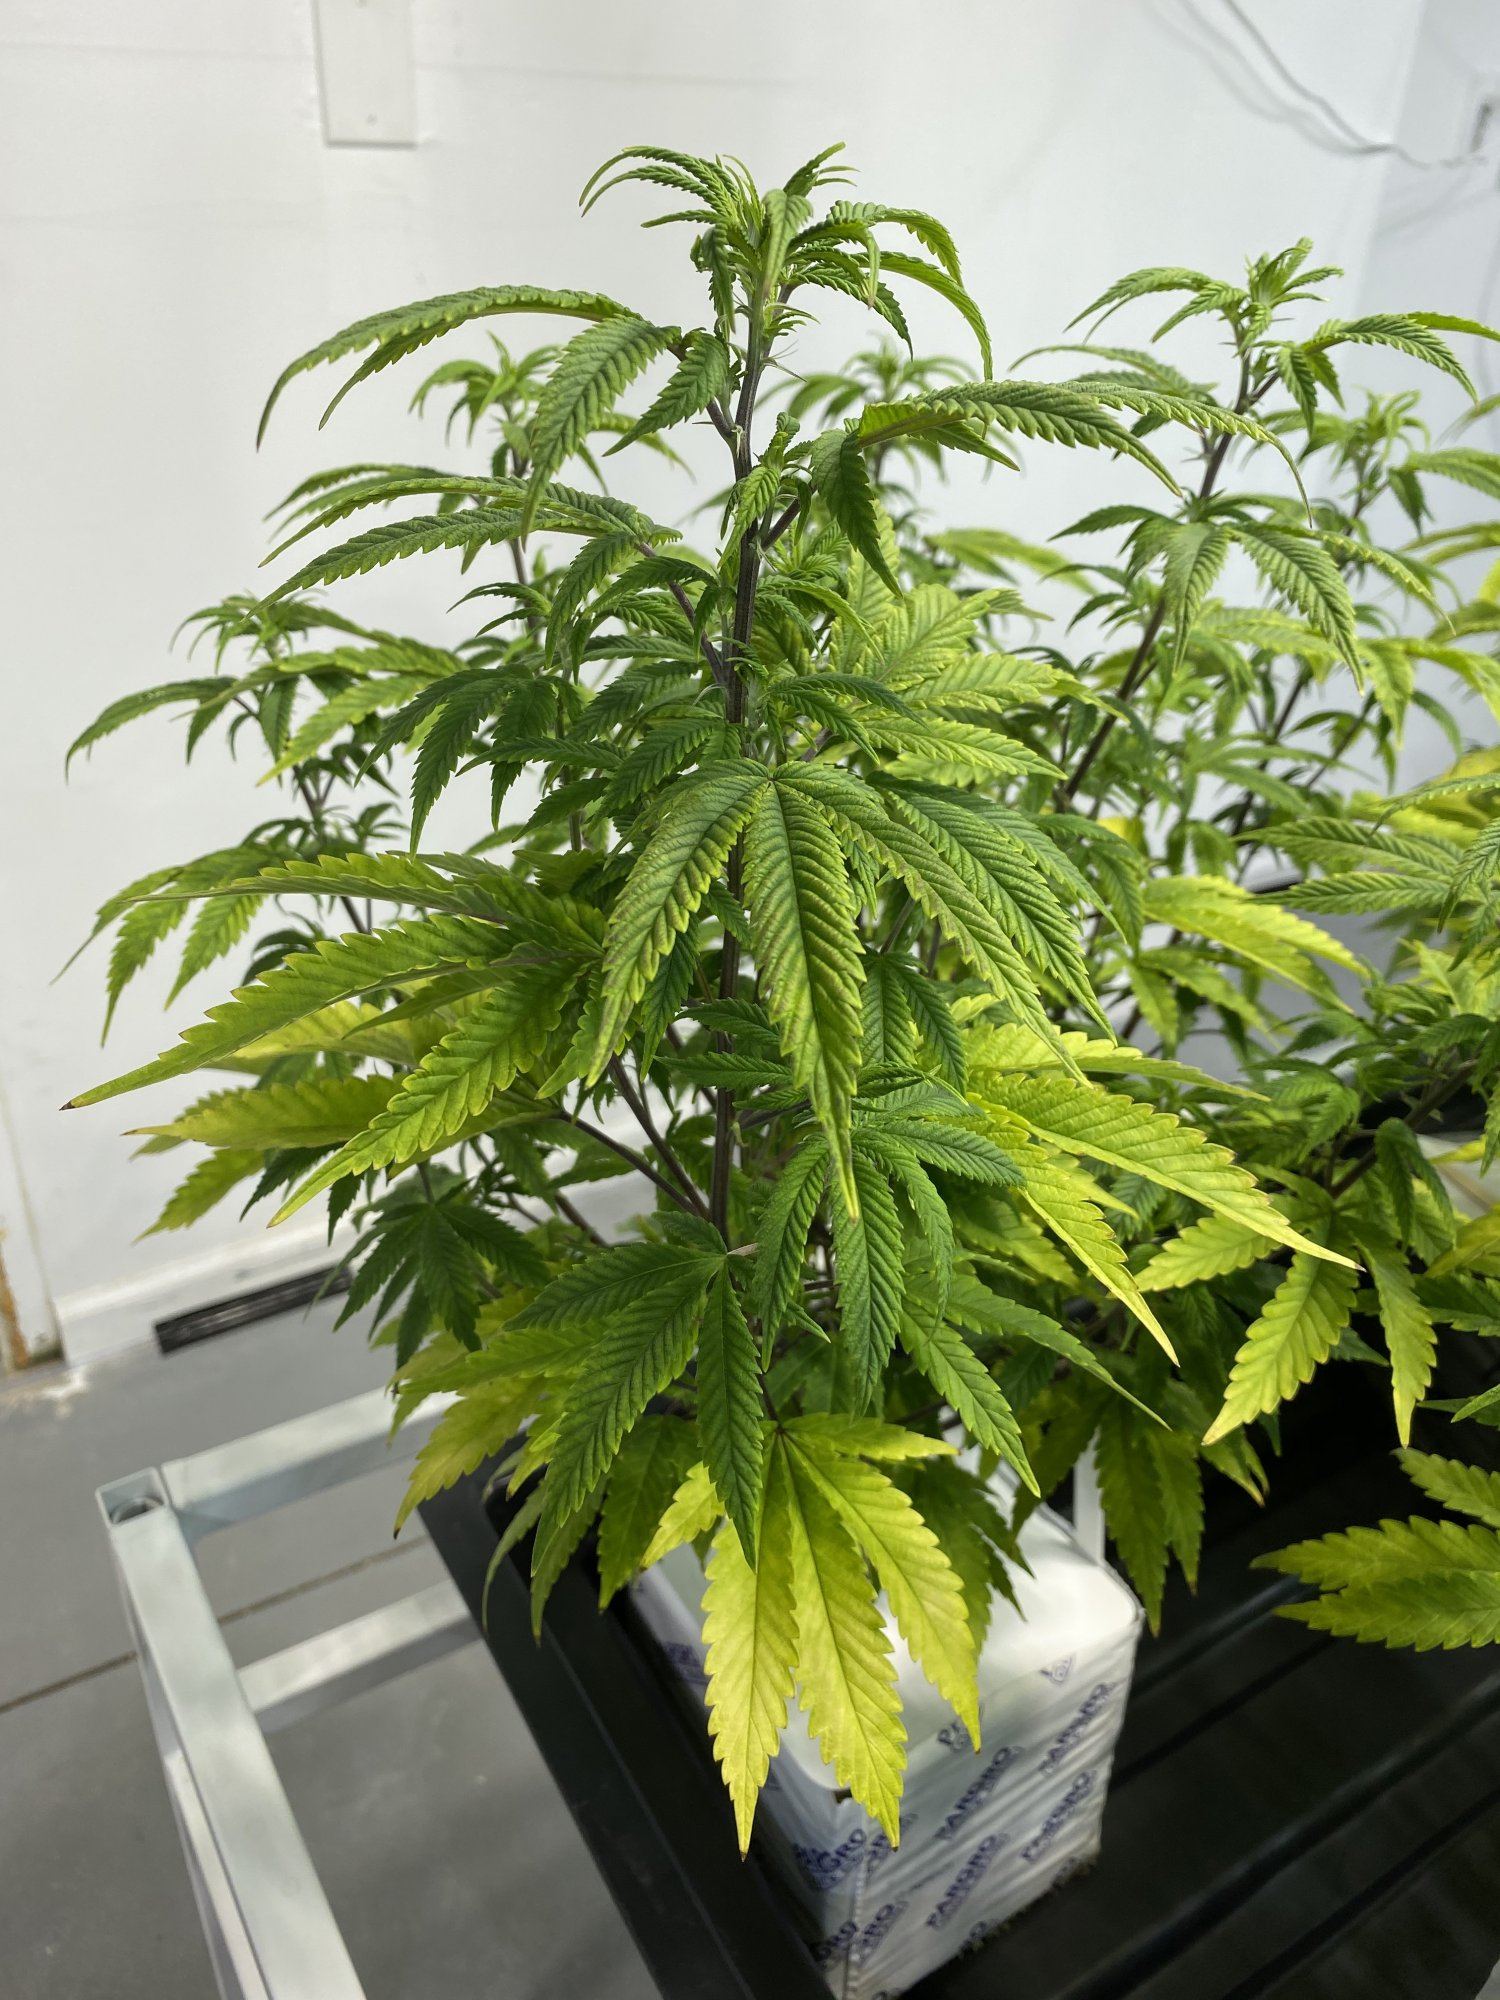 Low ph runoff   discoloration and leaf curl see pics